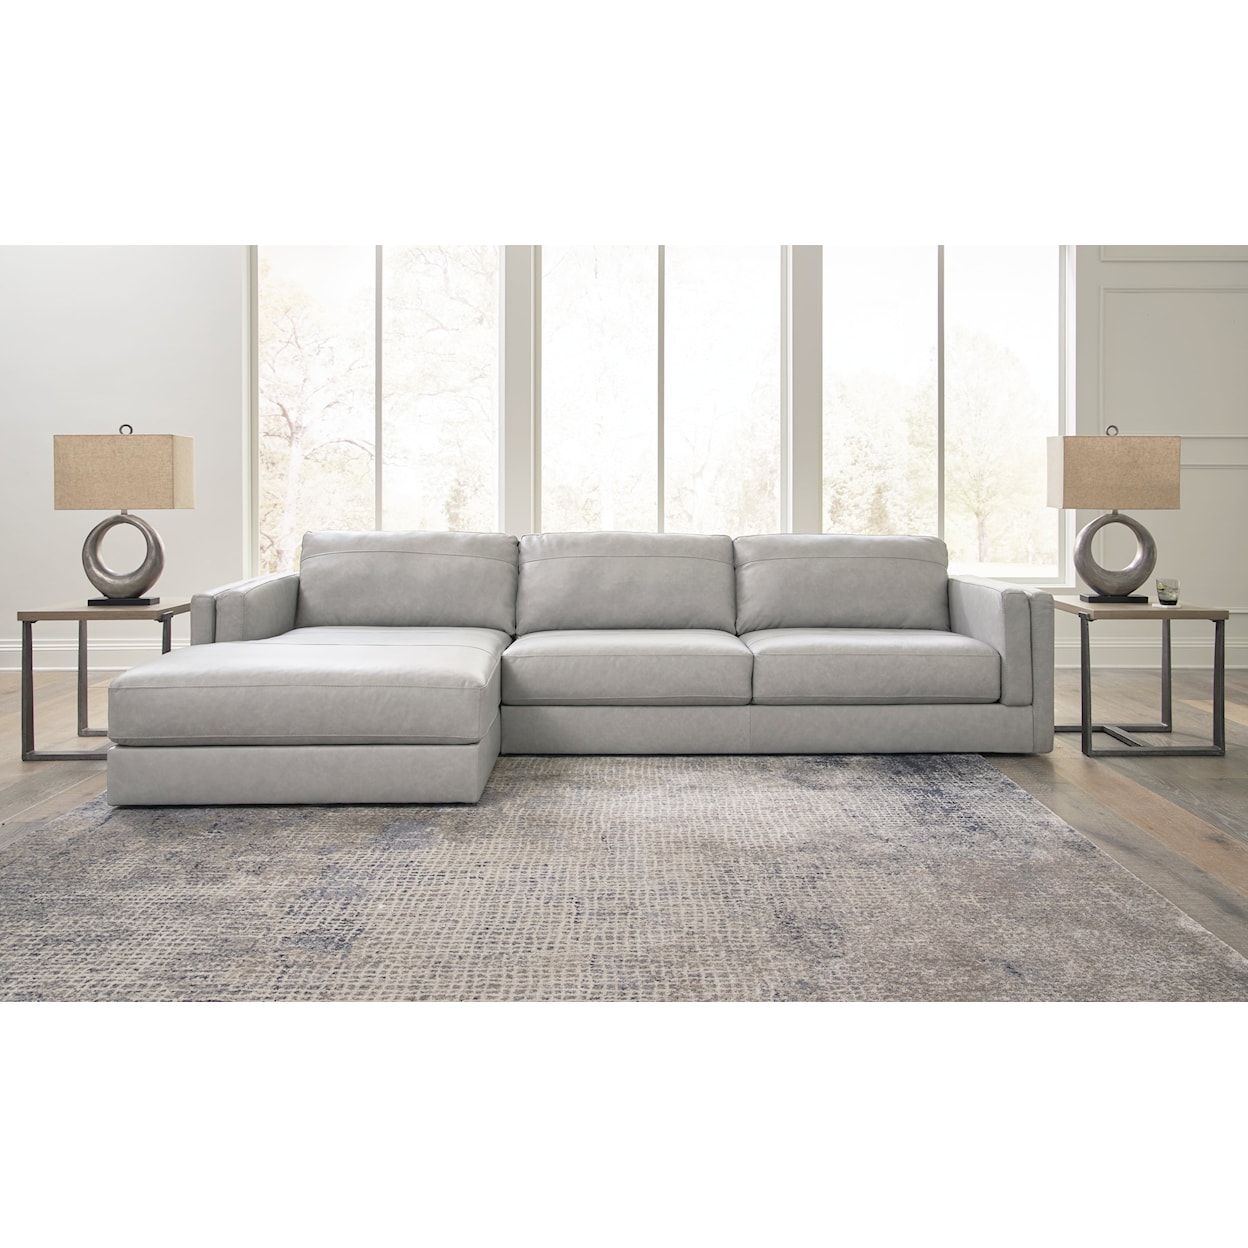 Ashley Furniture Signature Design Amiata 2-Piece Sectional With Chaise